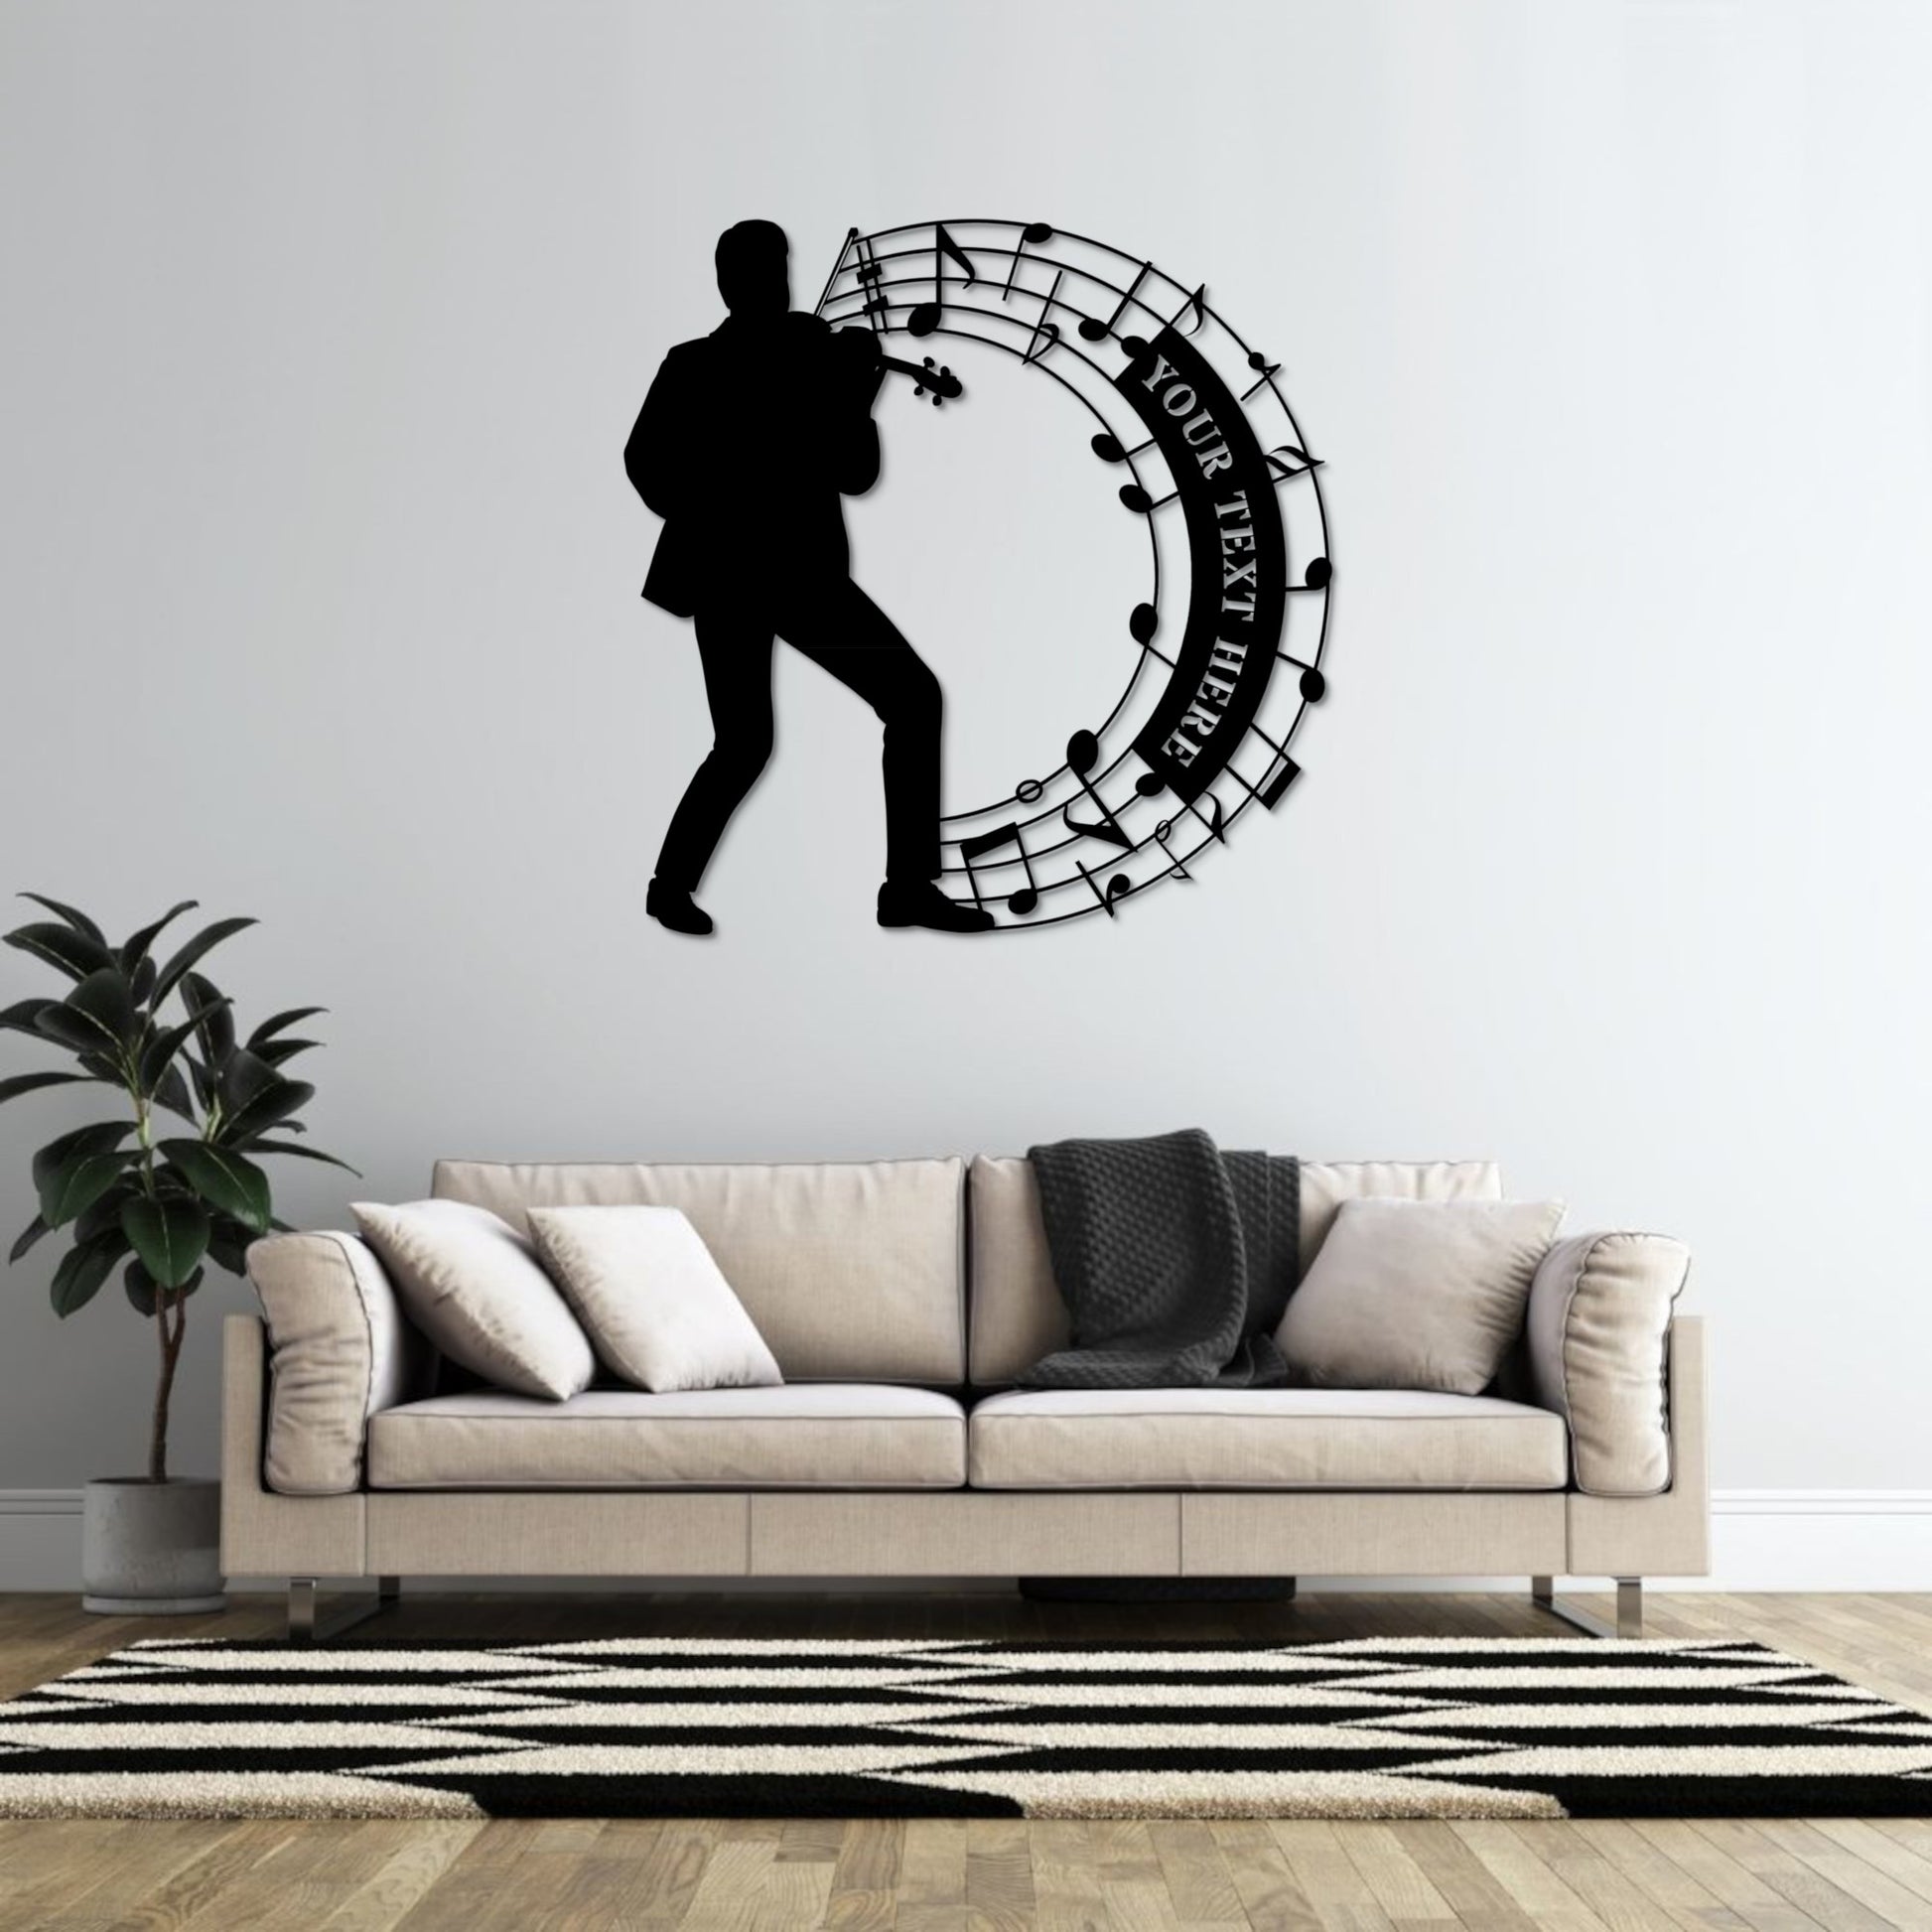 Personalized Violin Name Metal Sign Gift. Custom Violinist Wall Decor. Musician Entertainer. Musical Notes Wall Hanging. Music Room Decor